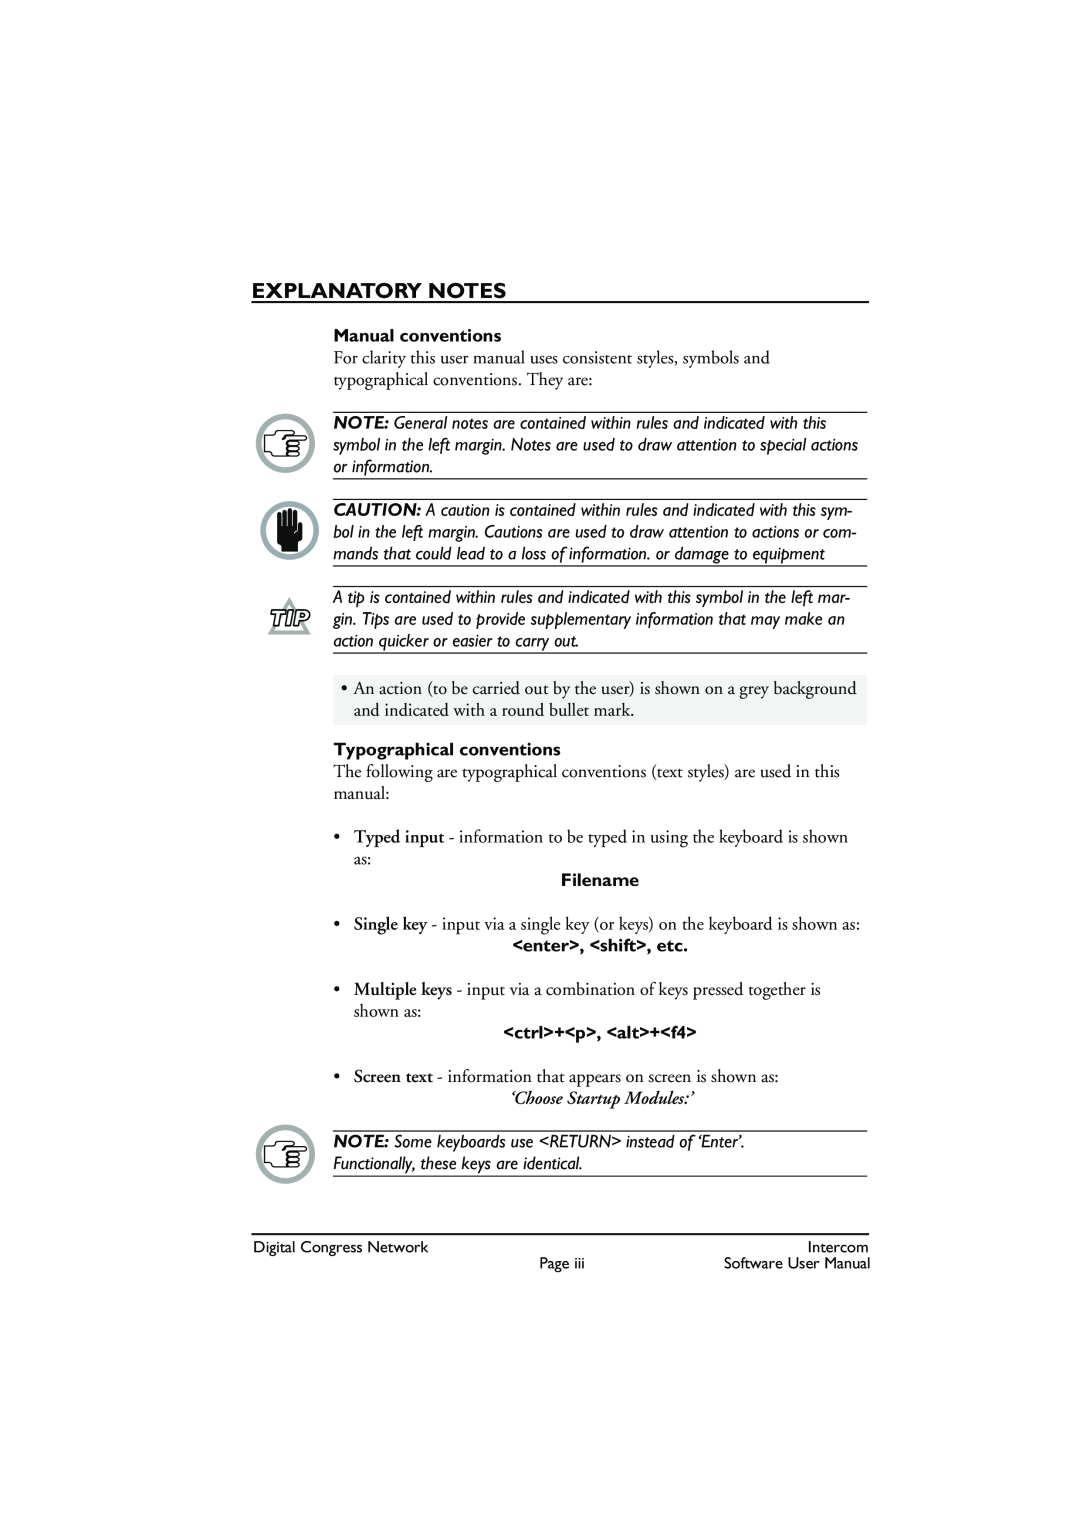 Bosch Appliances LBB 3573 Manual conventions, Typographical conventions, Filename, enter , shift , etc, Explanatory Notes 